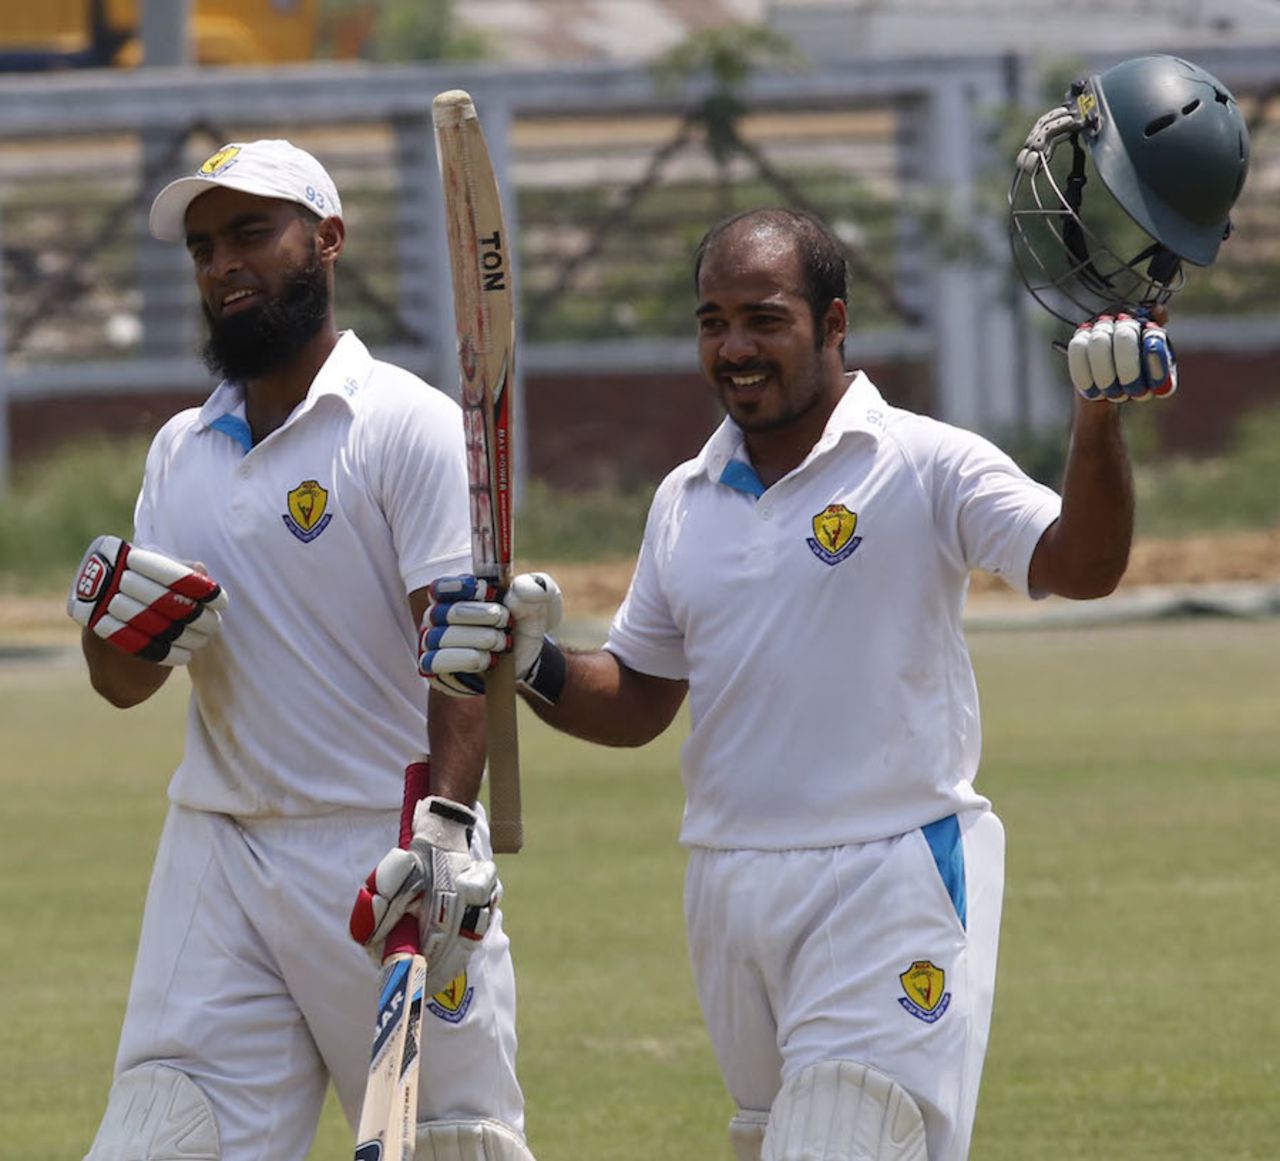 Tanveer Haider celebrates his second first-class century, Sylhet Division v Rangpur Division, National cricket league, 2nd day, Fatullah, April 13, 2014